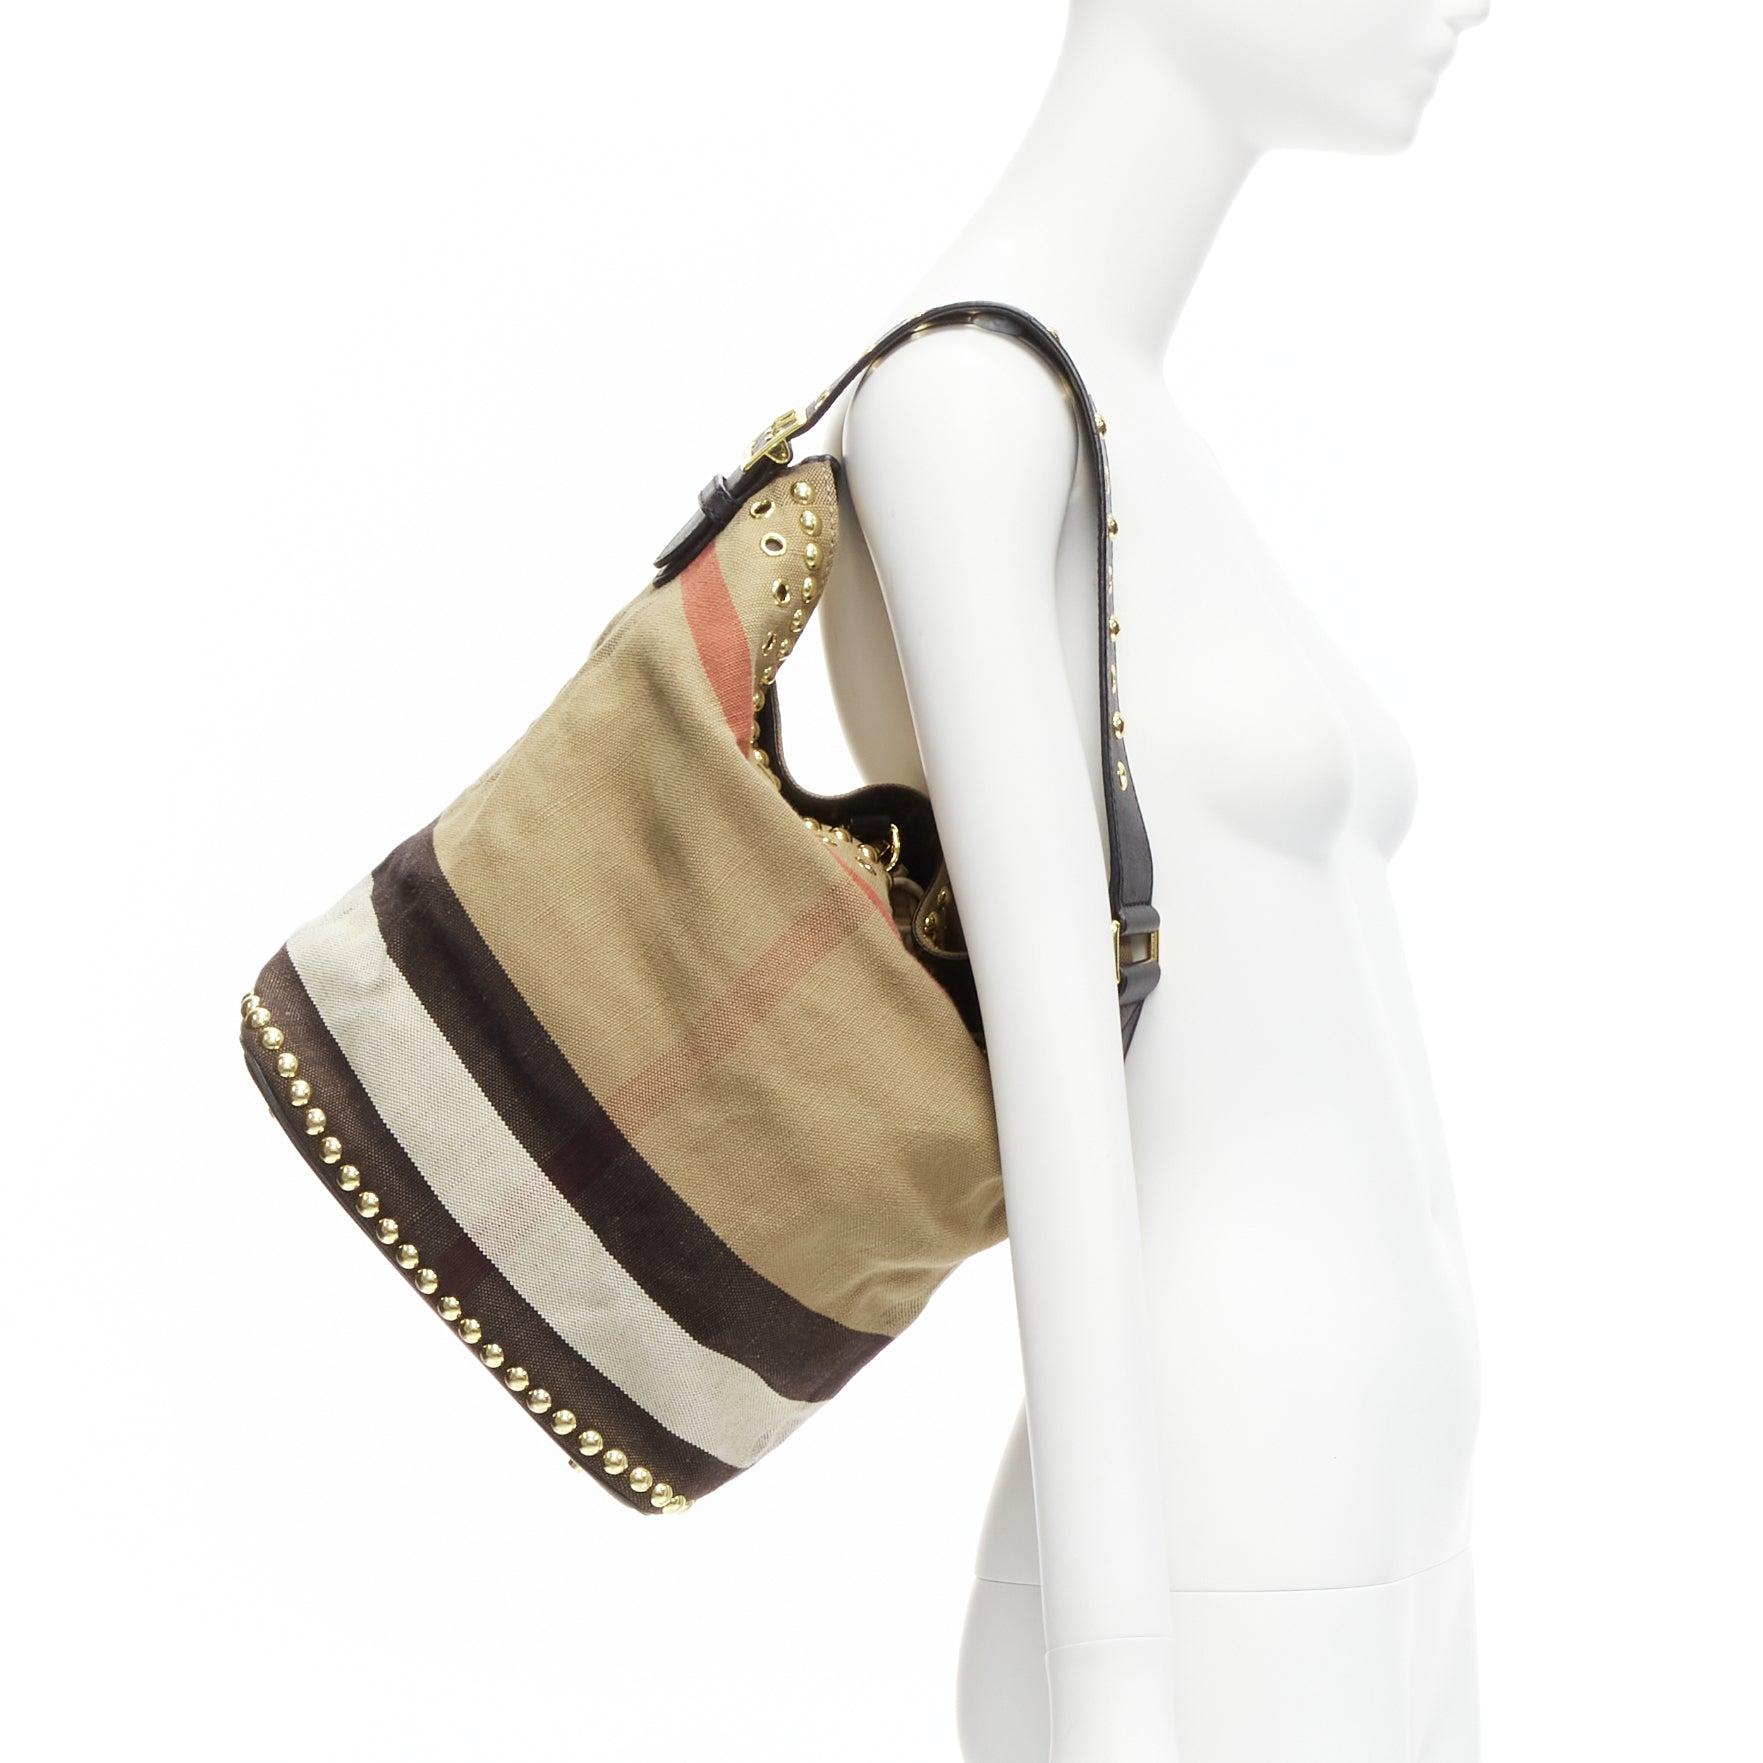 BURBERRY Ashby khaki big house check gold studded black leather bucket bag
Reference: TGAS/D00659
Brand: Burberry
Model: Ashby
Material: Fabric, Leather
Color: Beige, Black
Pattern: Checkered
Closure: Lobster Clasp
Lining: Black Fabric
Extra